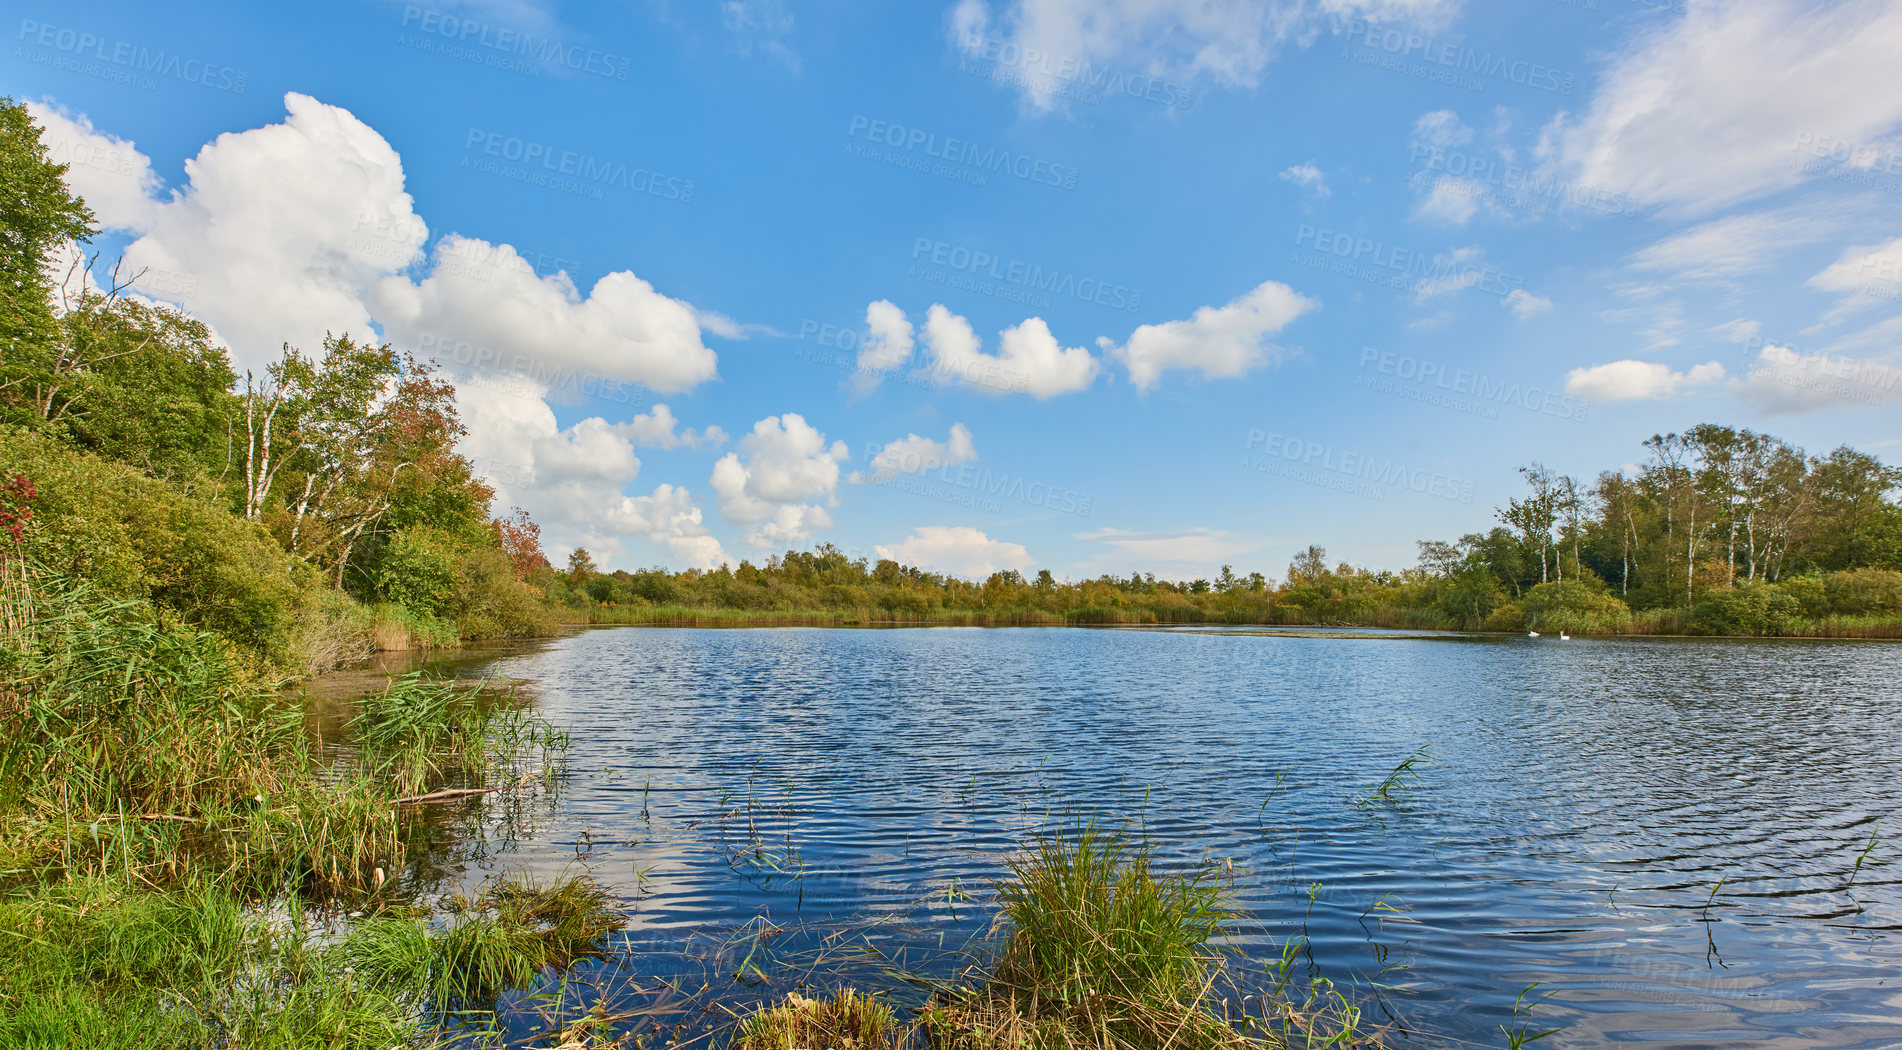 Buy stock photo Copyspace and scenic landscape of a calm and quiet lake surround by trees and scrubs and a cloudy blue sky above in Denmark. A forest with a river and lush green plants in a remote location in nature